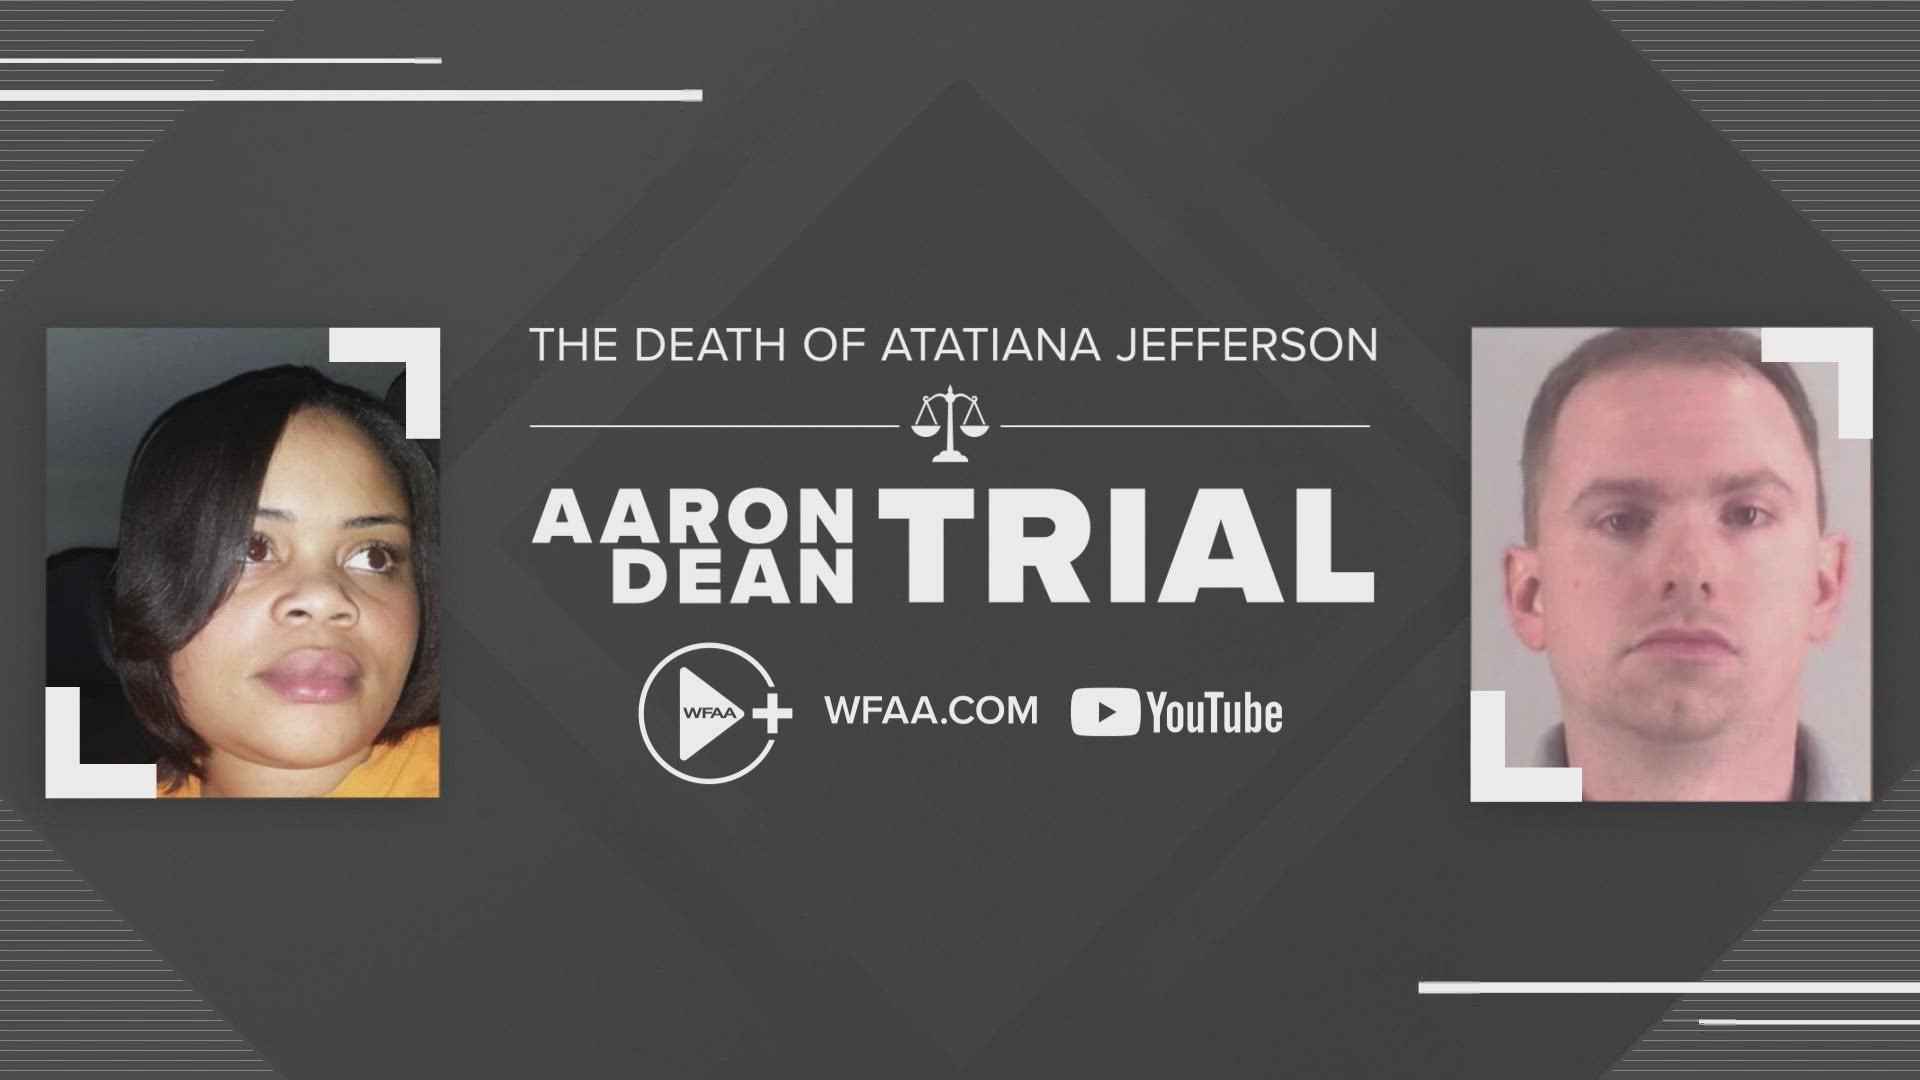 More than 1,100 days have passed since former Fort Worth police officer Aaron Dean killed Atatiana Jefferson in her home. His trial starts this week.